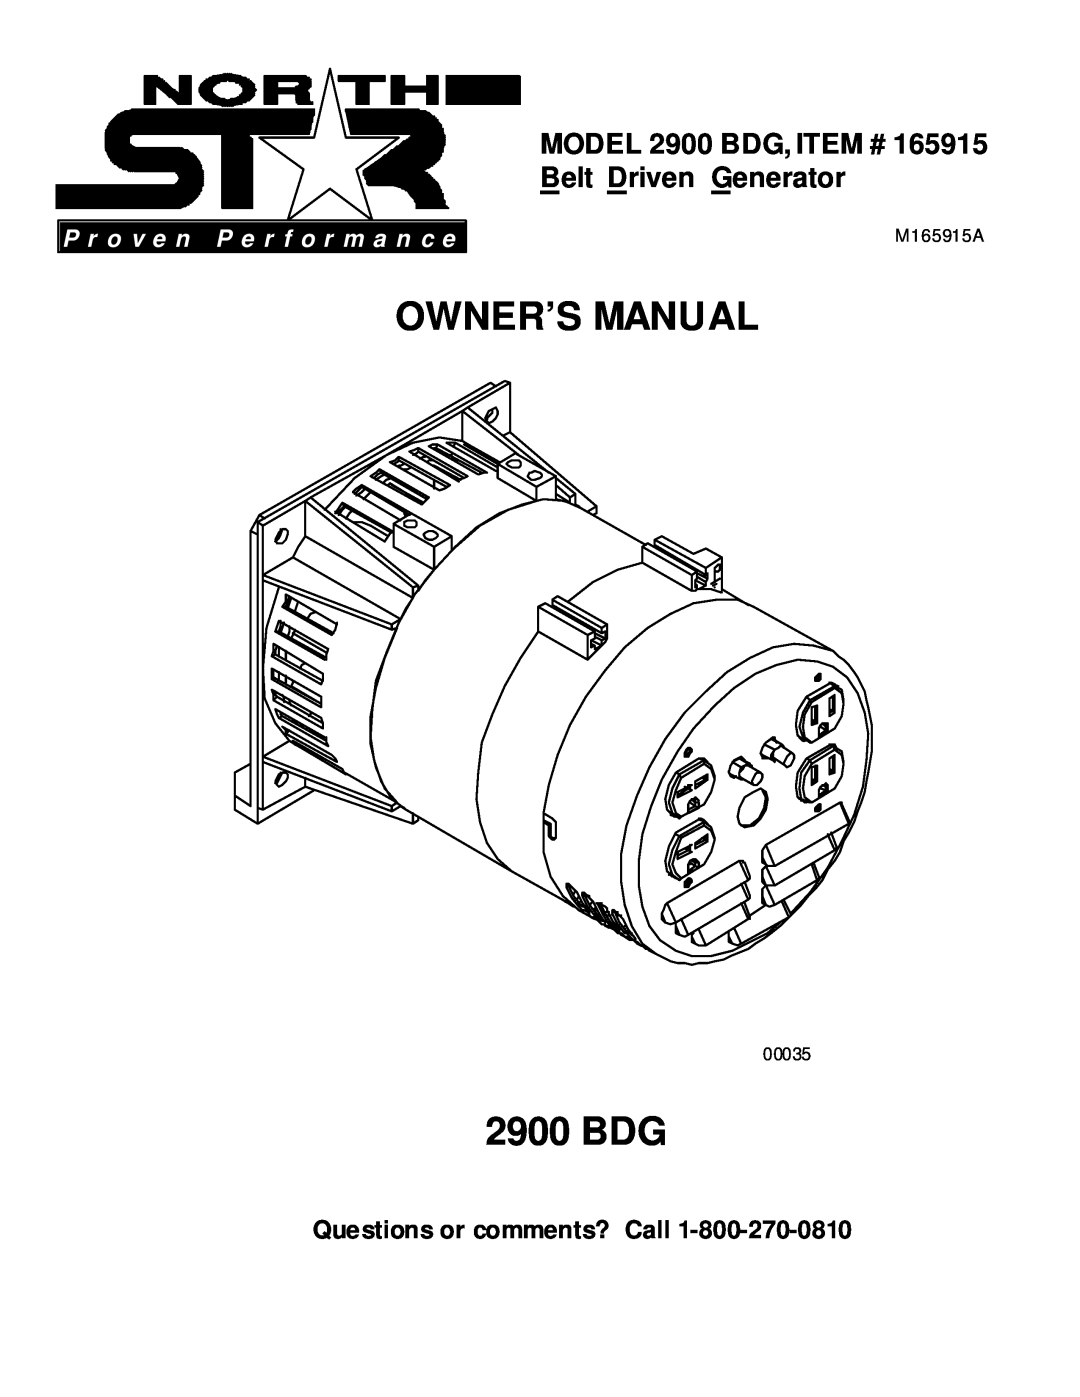 North Star owner manual Questions or comments? Call, MODEL 2900 BDG, ITEM # 165915 Belt Driven Generator 